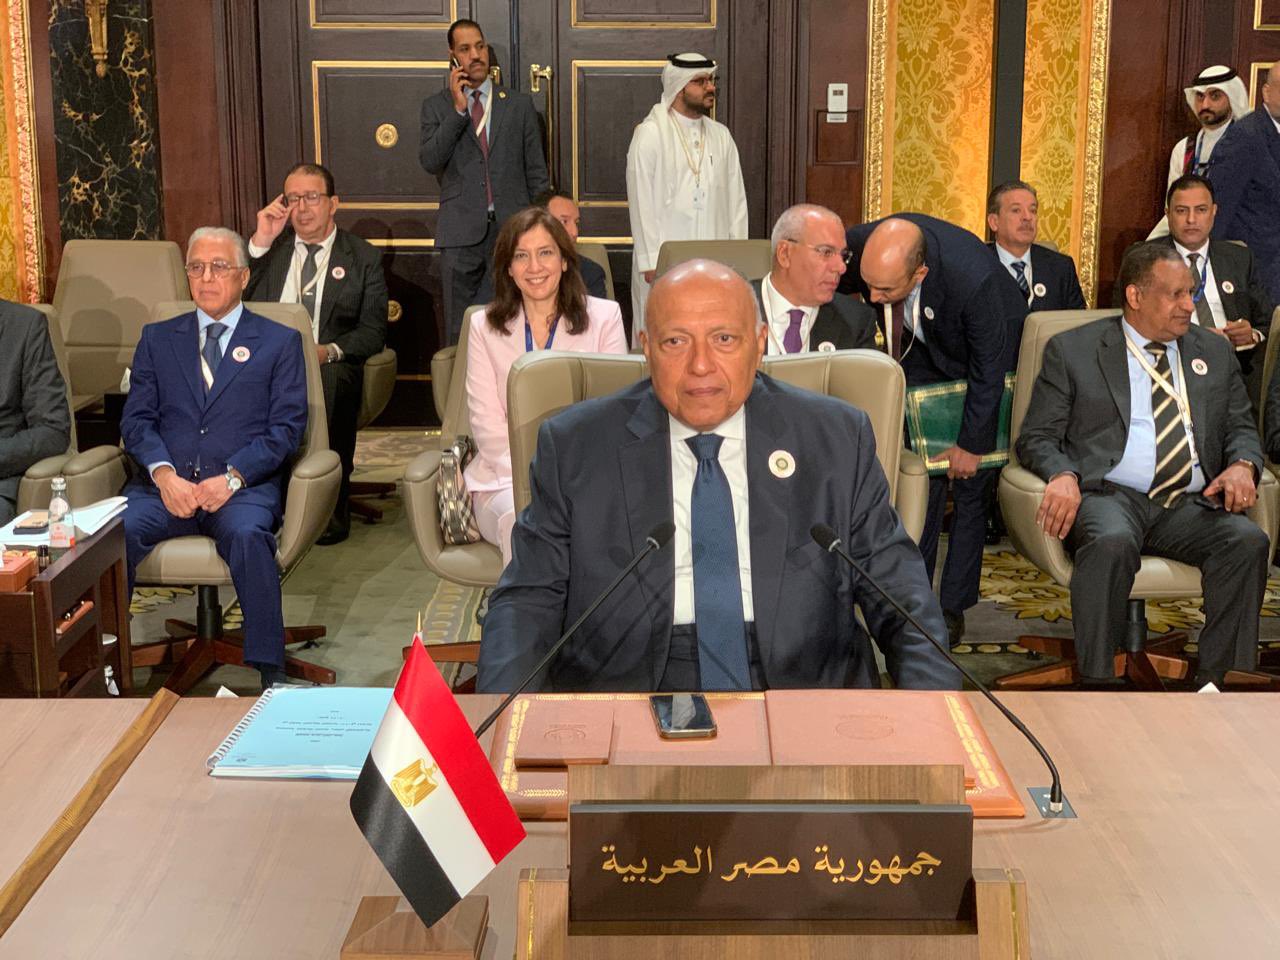 The Minister of Foreign Affairs heads the Egyptian delegation to the opening session of the Arab League Council meeting